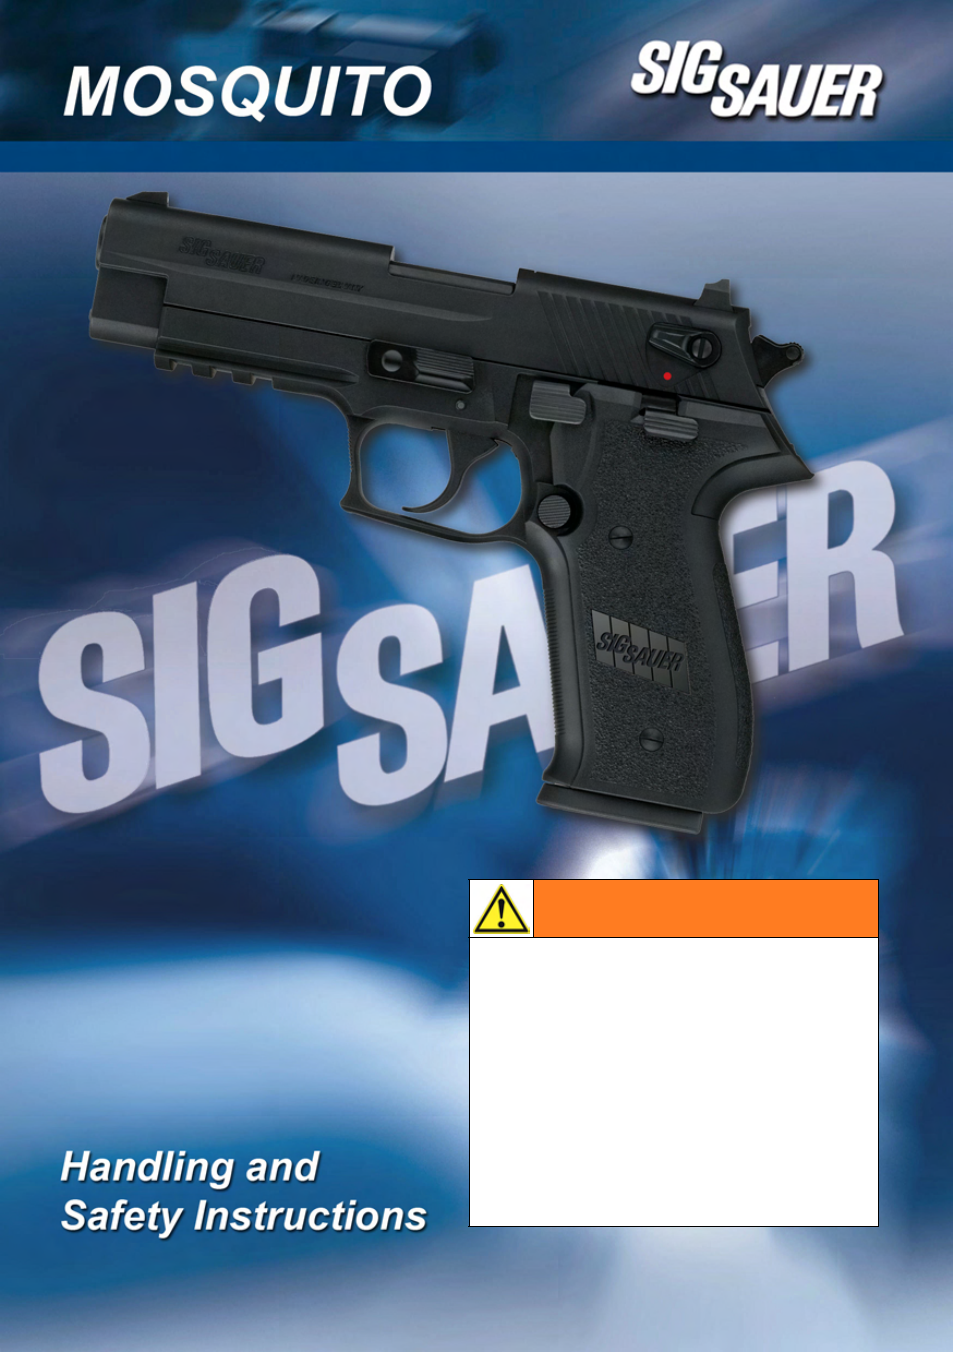 MOSQUITO OWNERS MANUAL SIG SAUER ARMS 28 PAGES